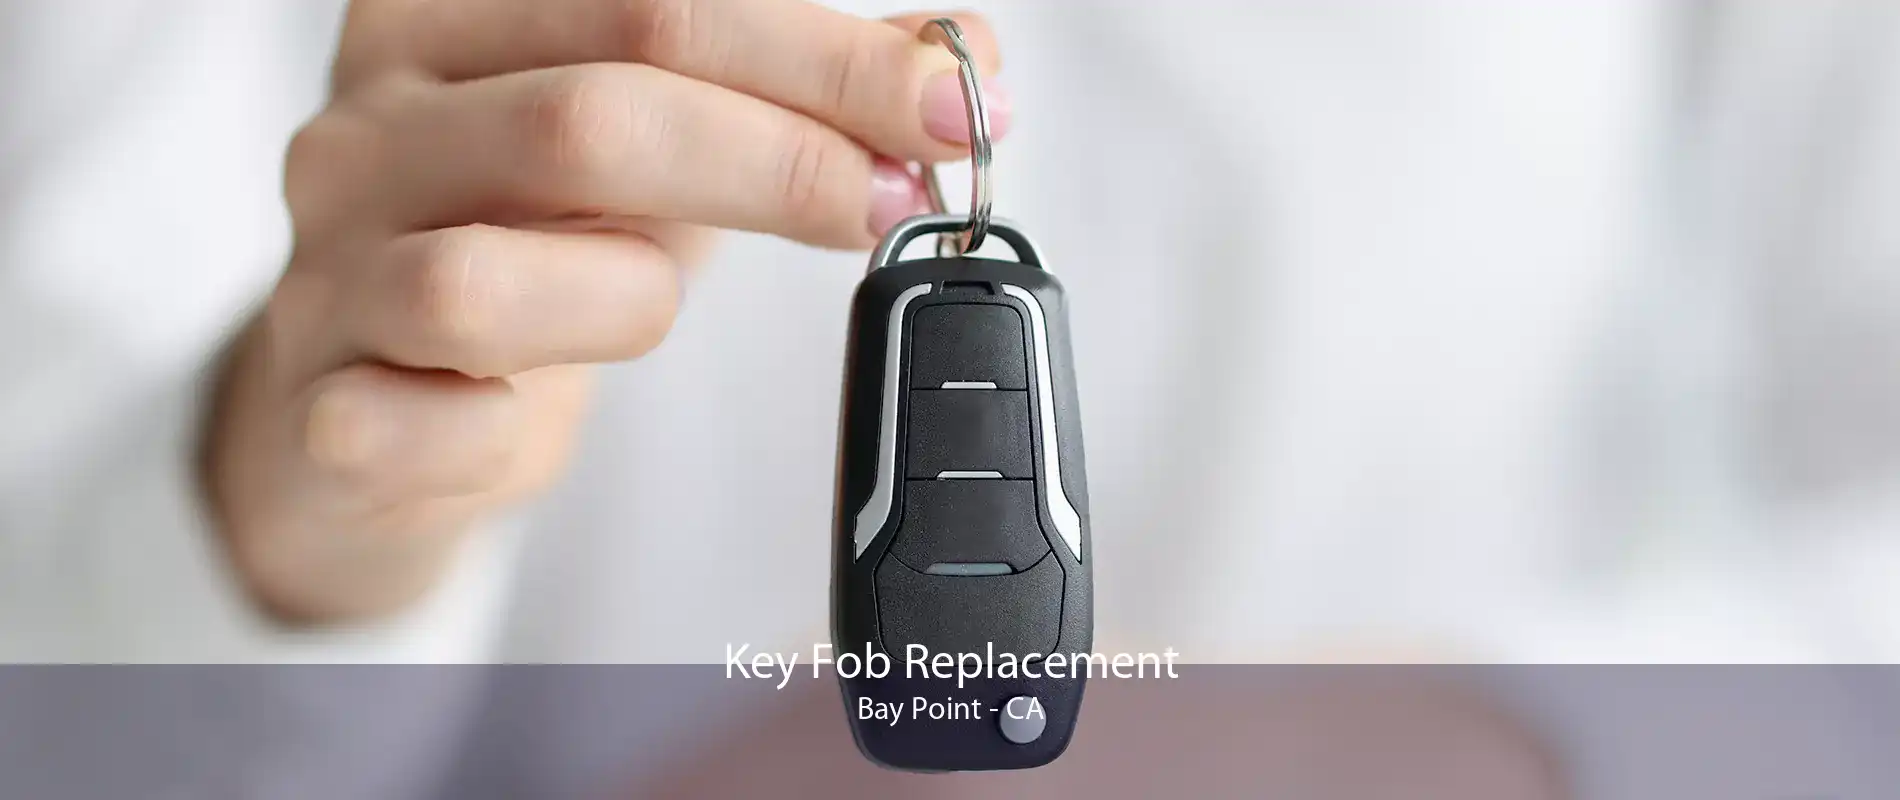 Key Fob Replacement Bay Point - CA